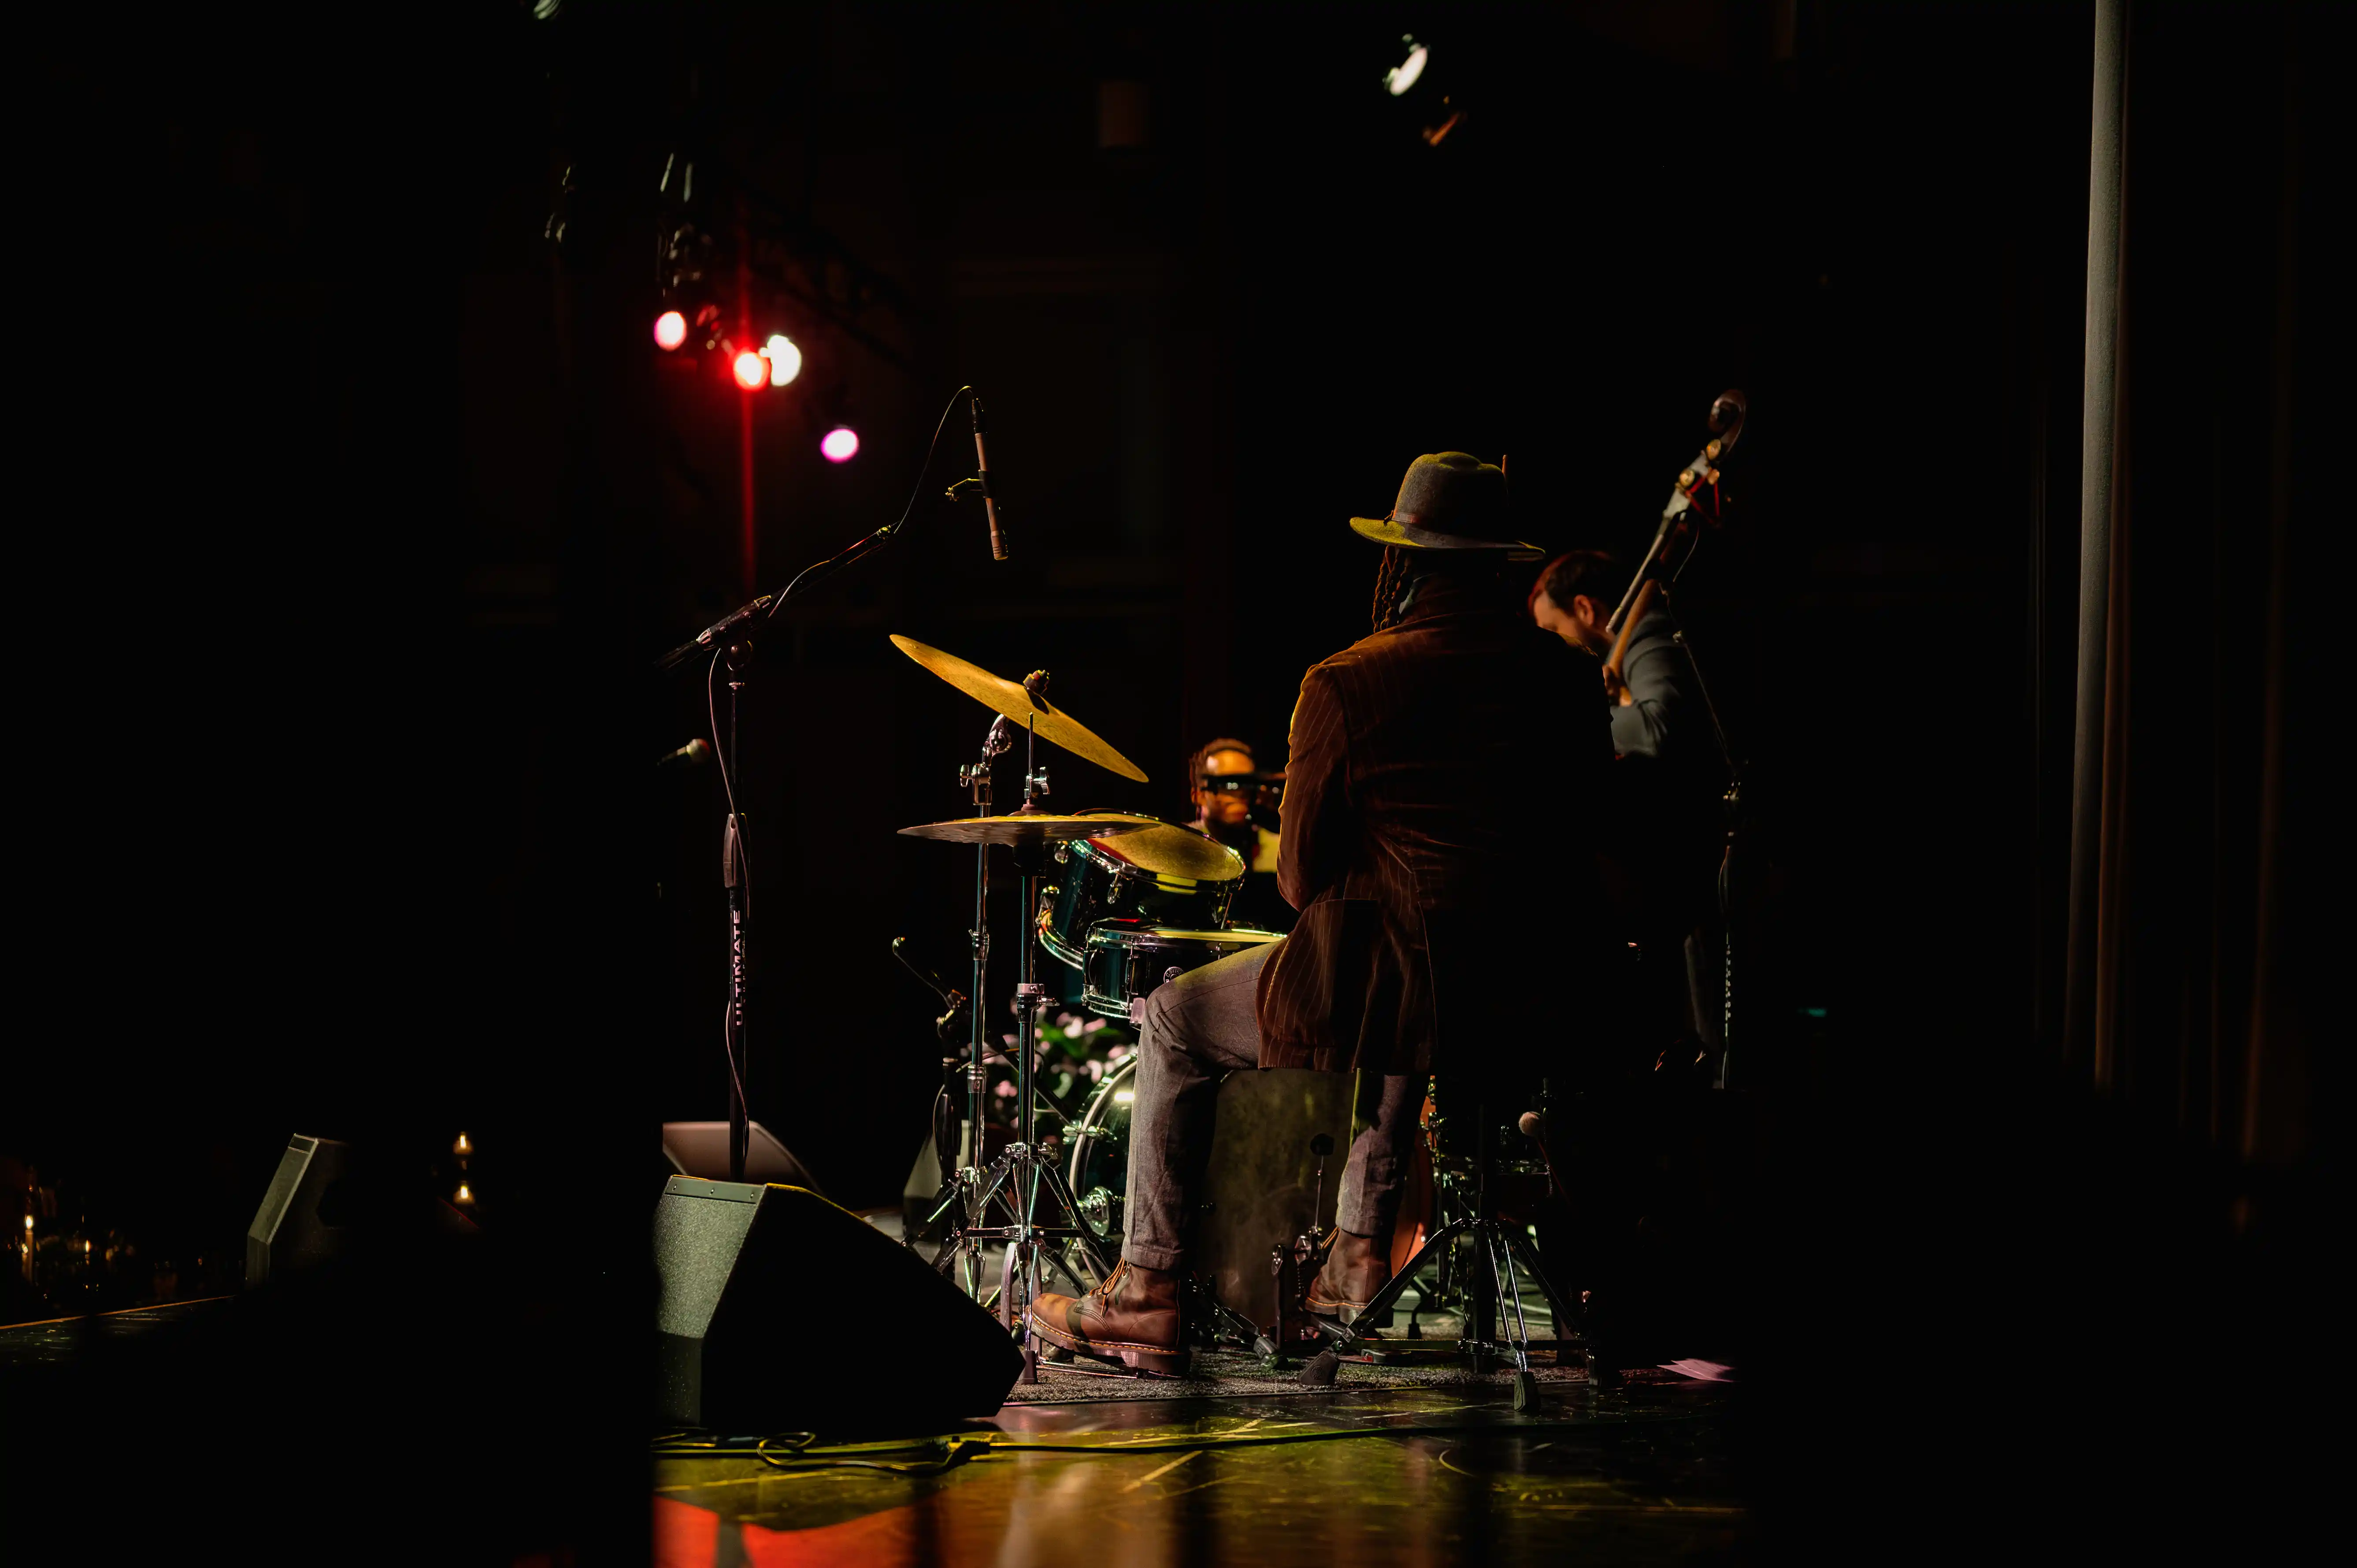 Musicians on stage with a drummer in the background and a person with a guitar in the foreground, dimly lit with red stage lighting.